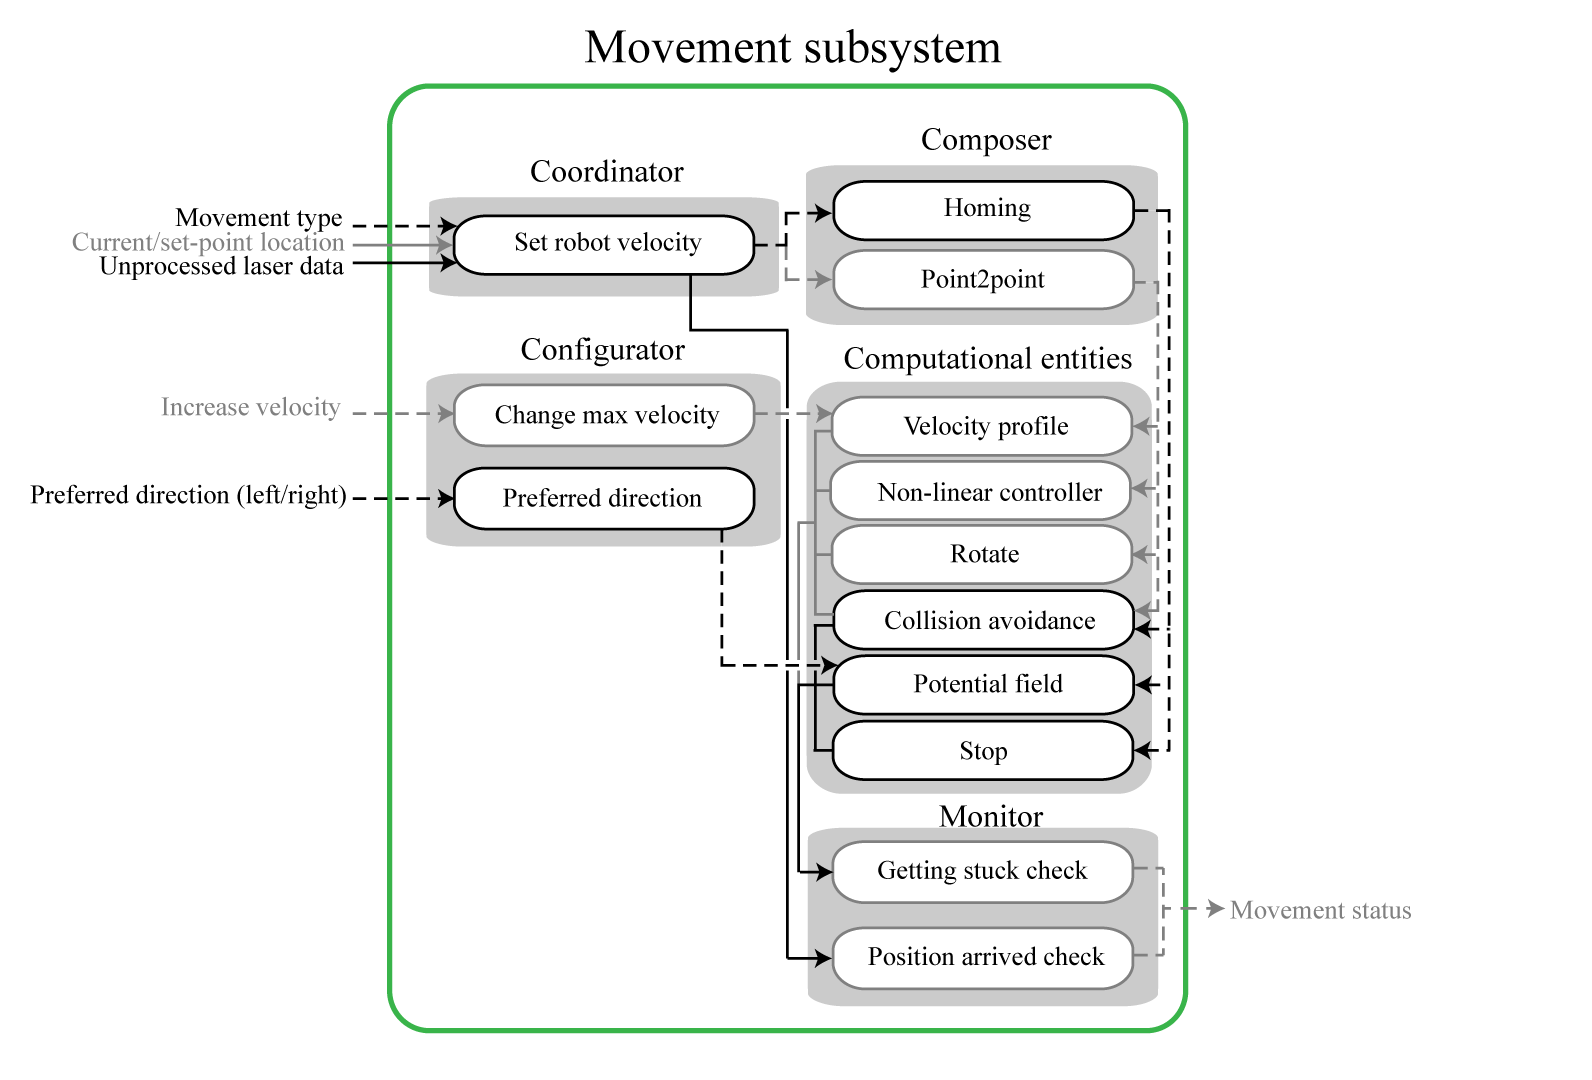 The movement subsystem.